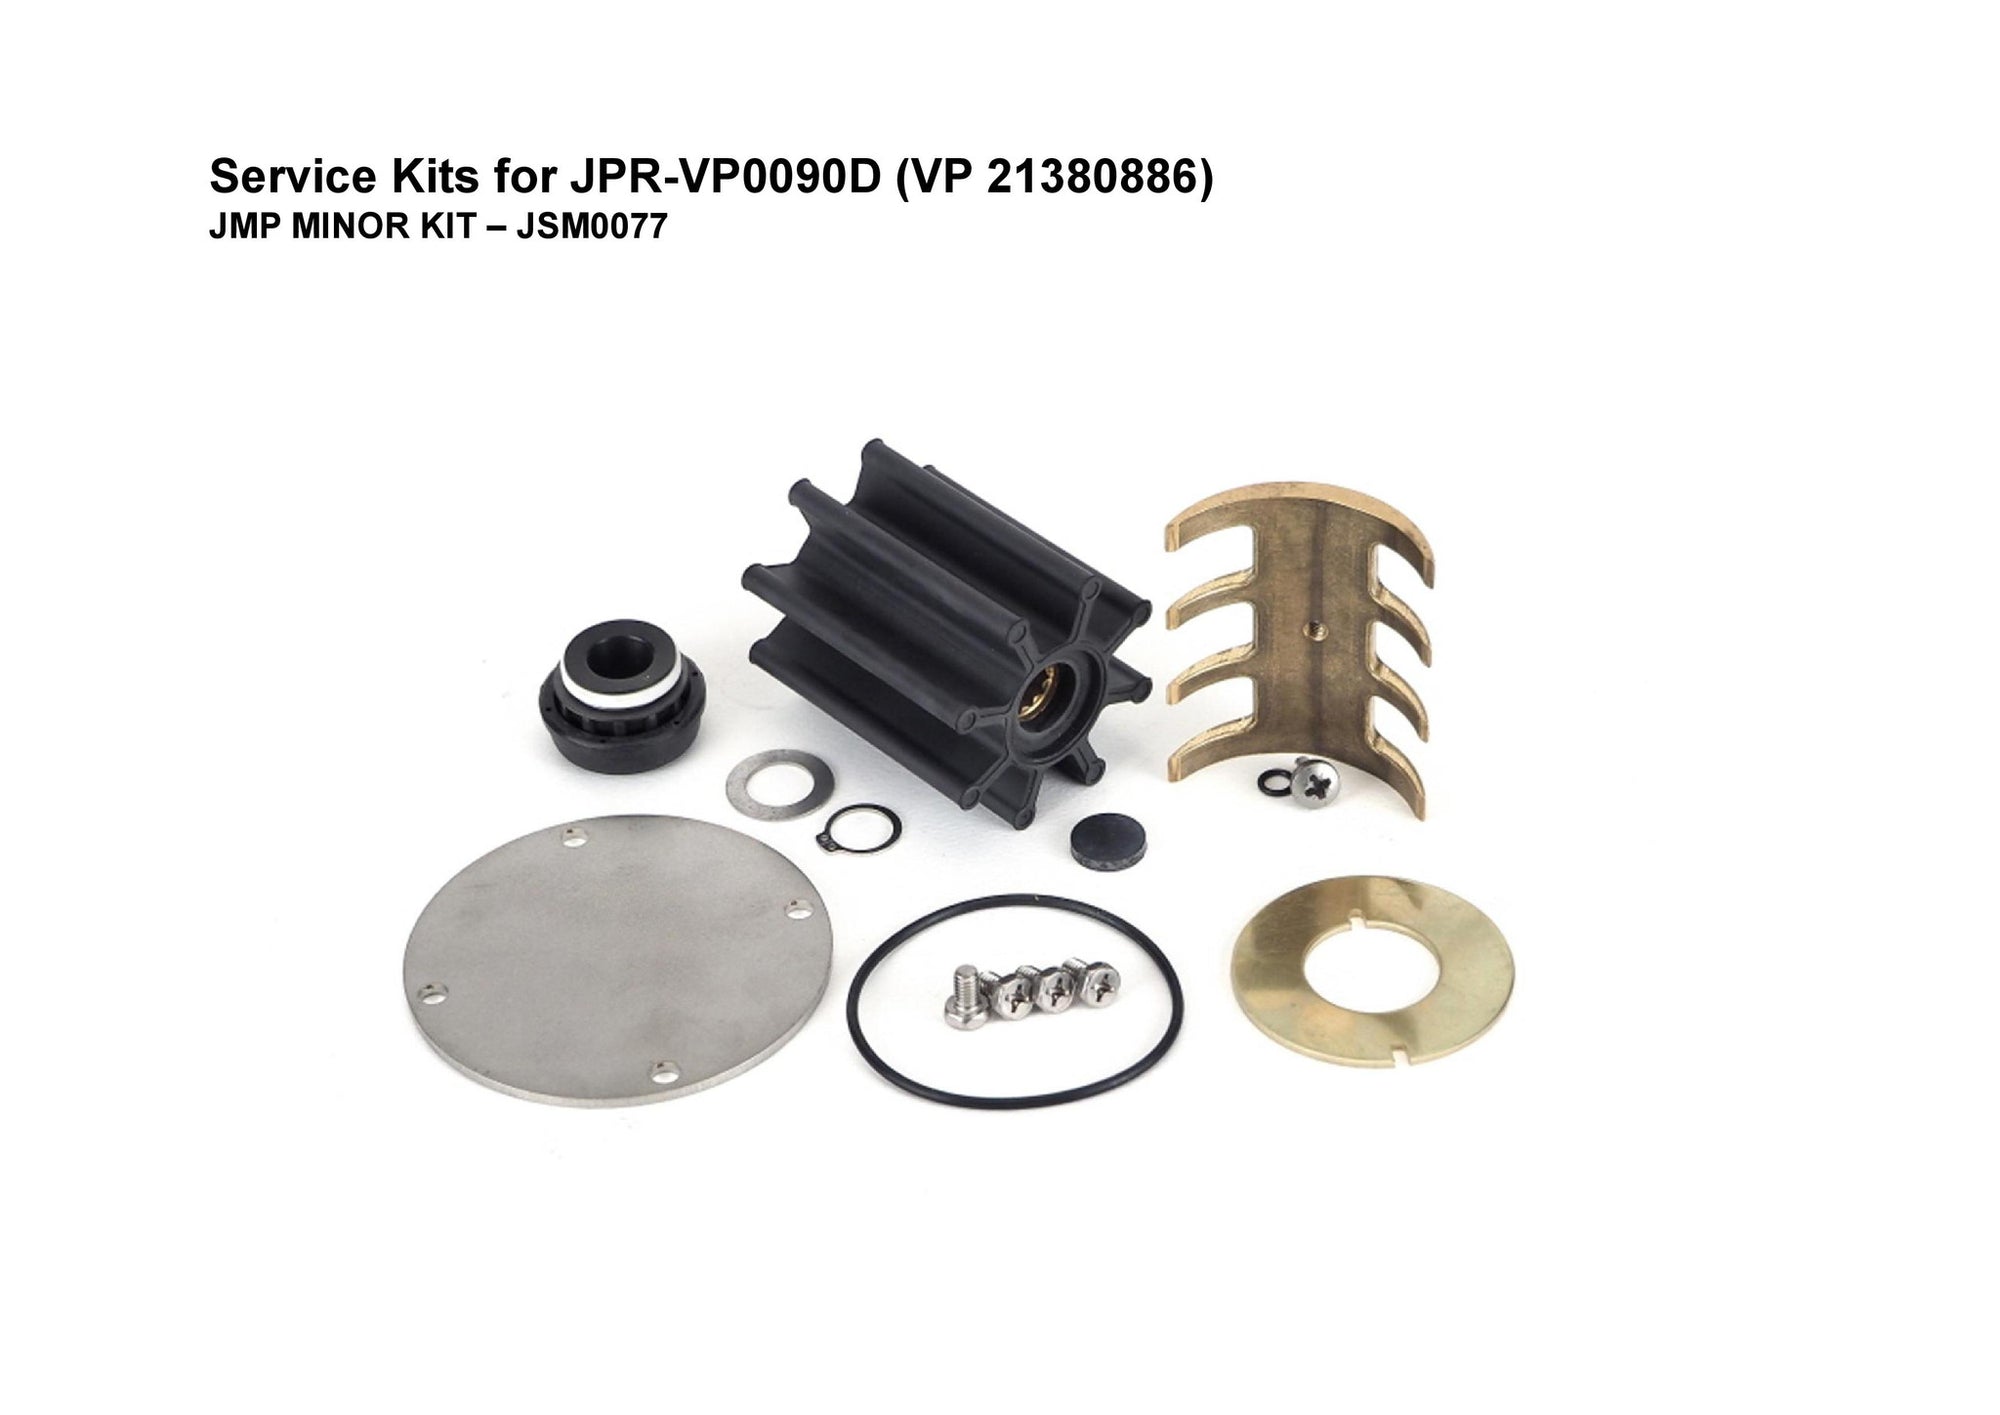 Service kit for Volvo Penta D9 Engine sea water pump -21380886